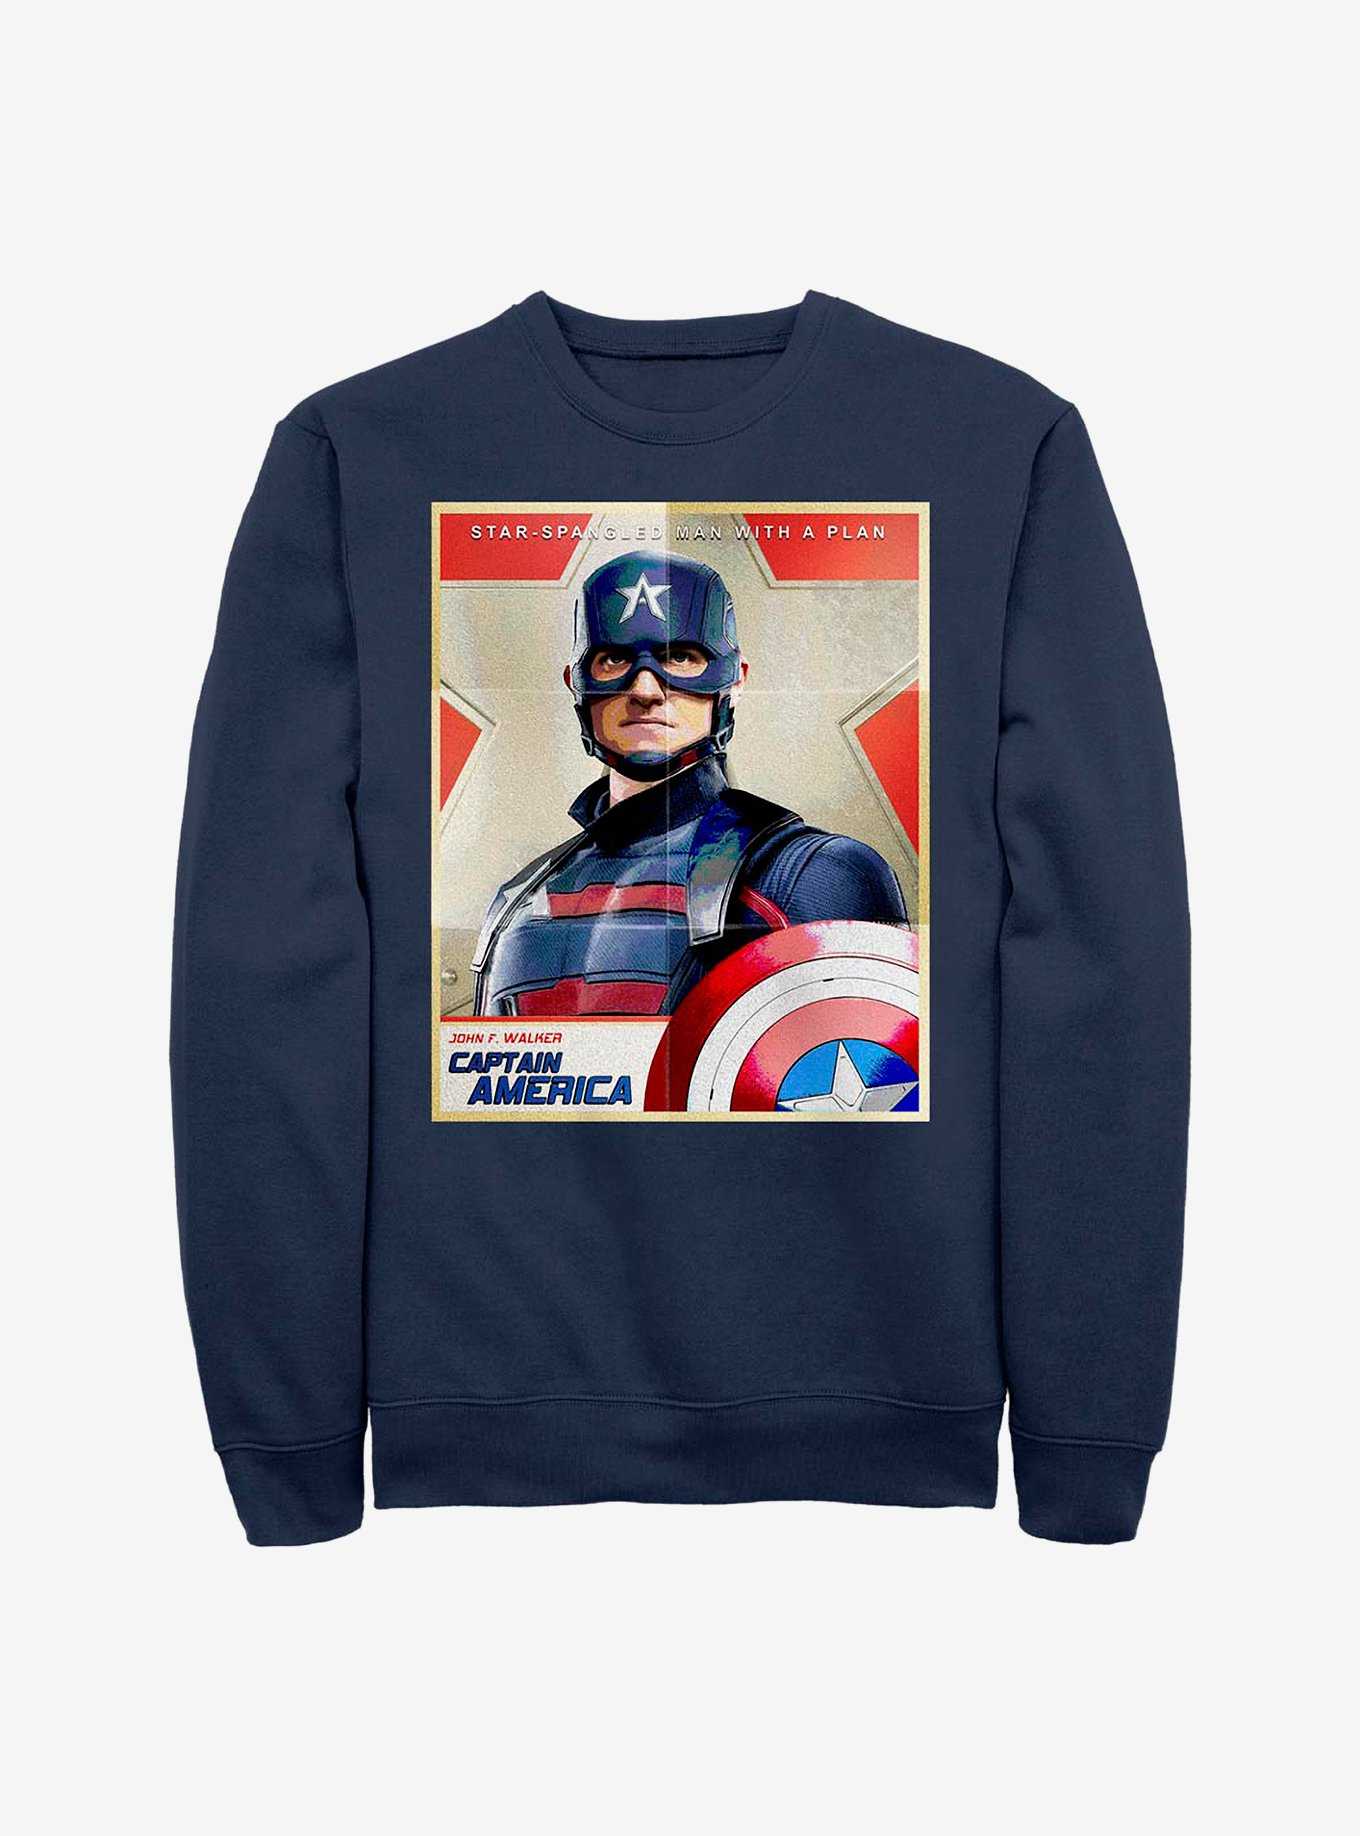 Marvel The Falcon And The Winter Soldier Inspired By Cap Sweatshirt, , hi-res